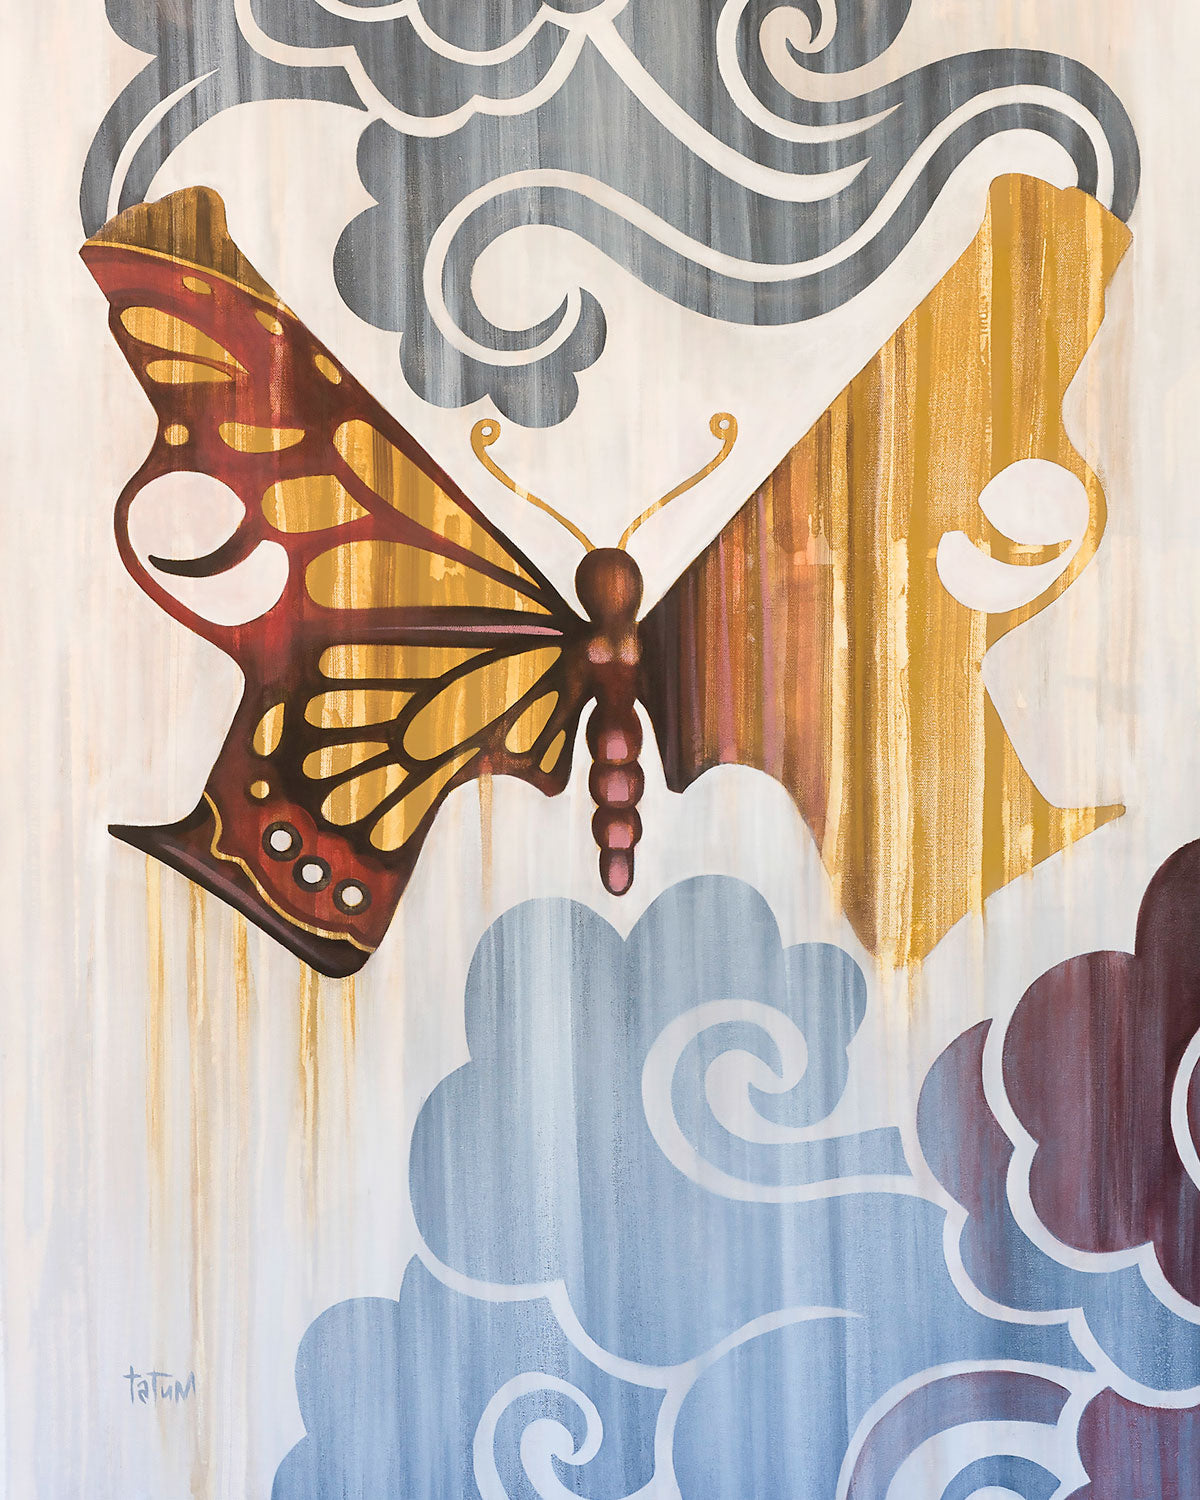 Butterfly Gun, by Robert Tatum, Choice Goods Gallery, Choice Goods Brand, white background with brown and grey zen clouds, gun with butterfly body and wings, brown, gold.